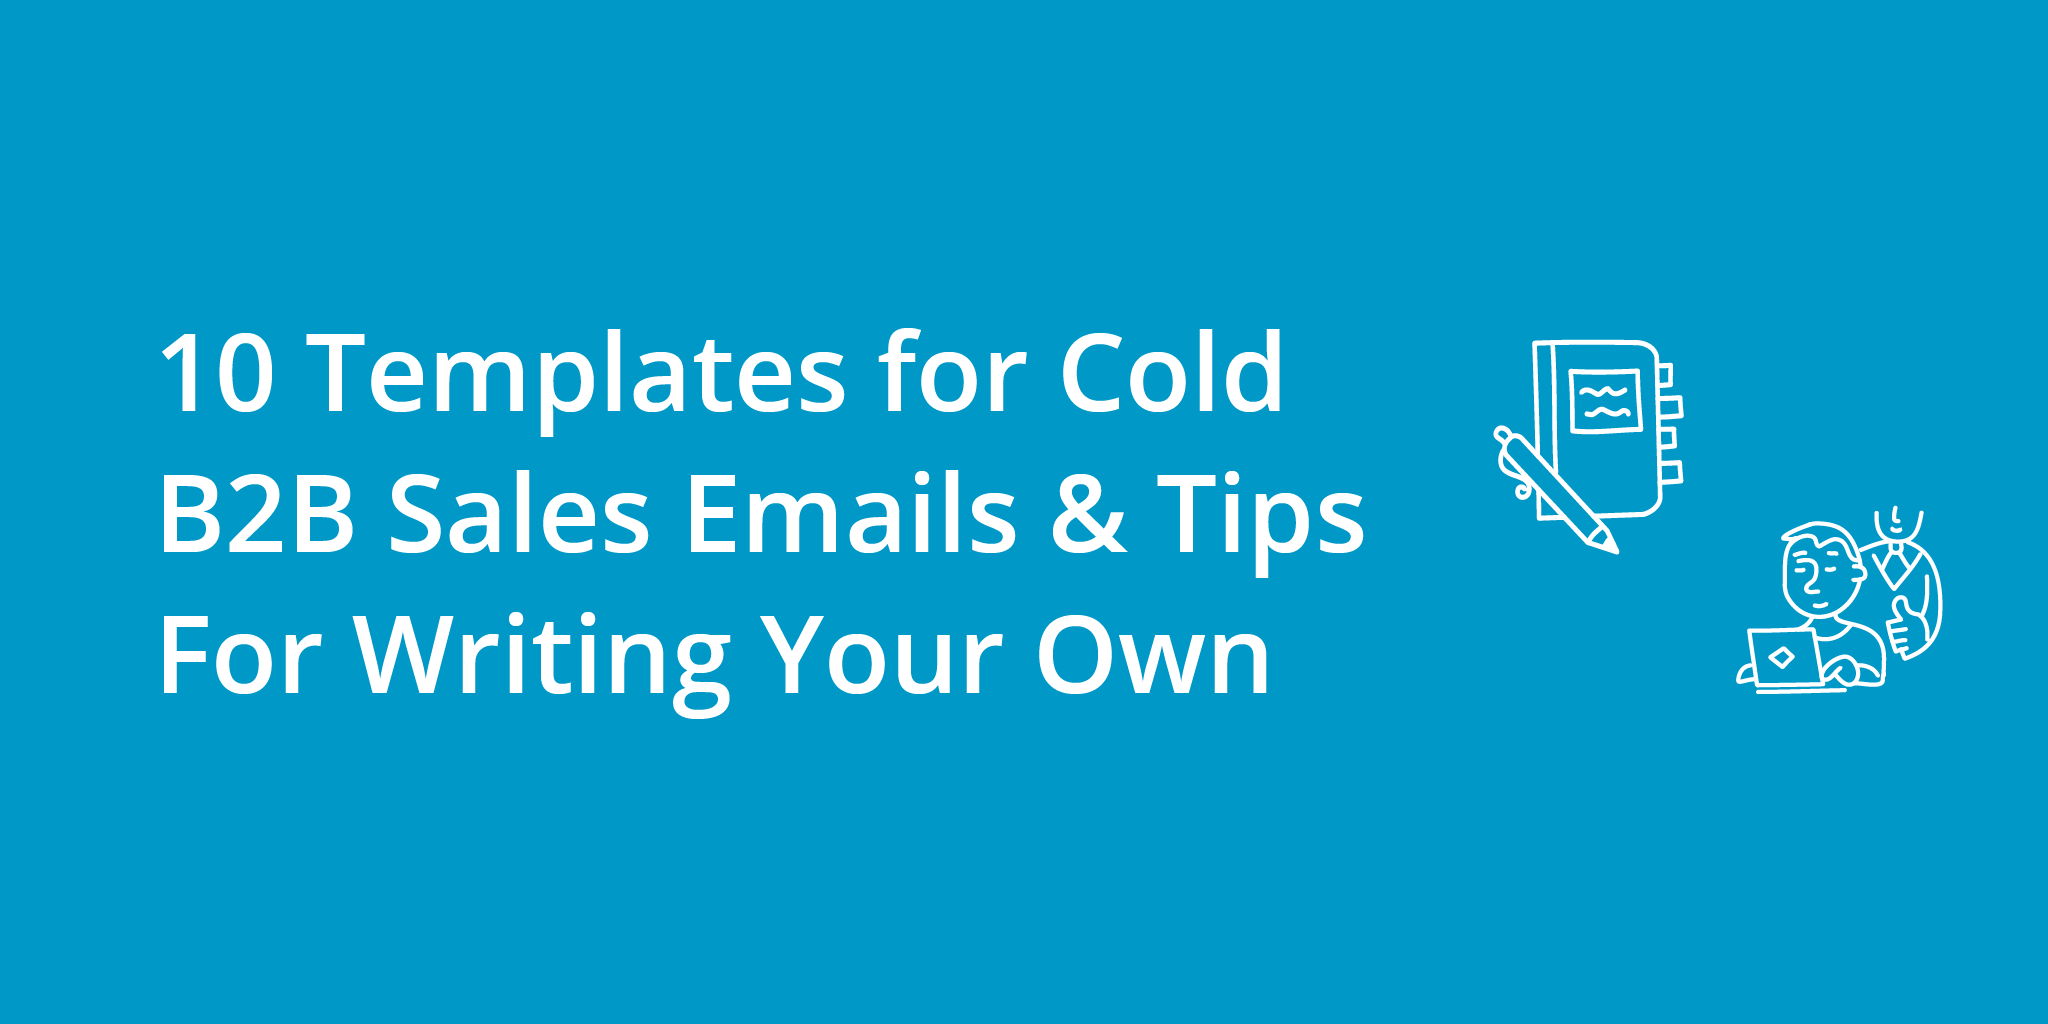 10 Templates for Cold B2B Sales Emails & Tips For Writing Your Own | Telephones for business